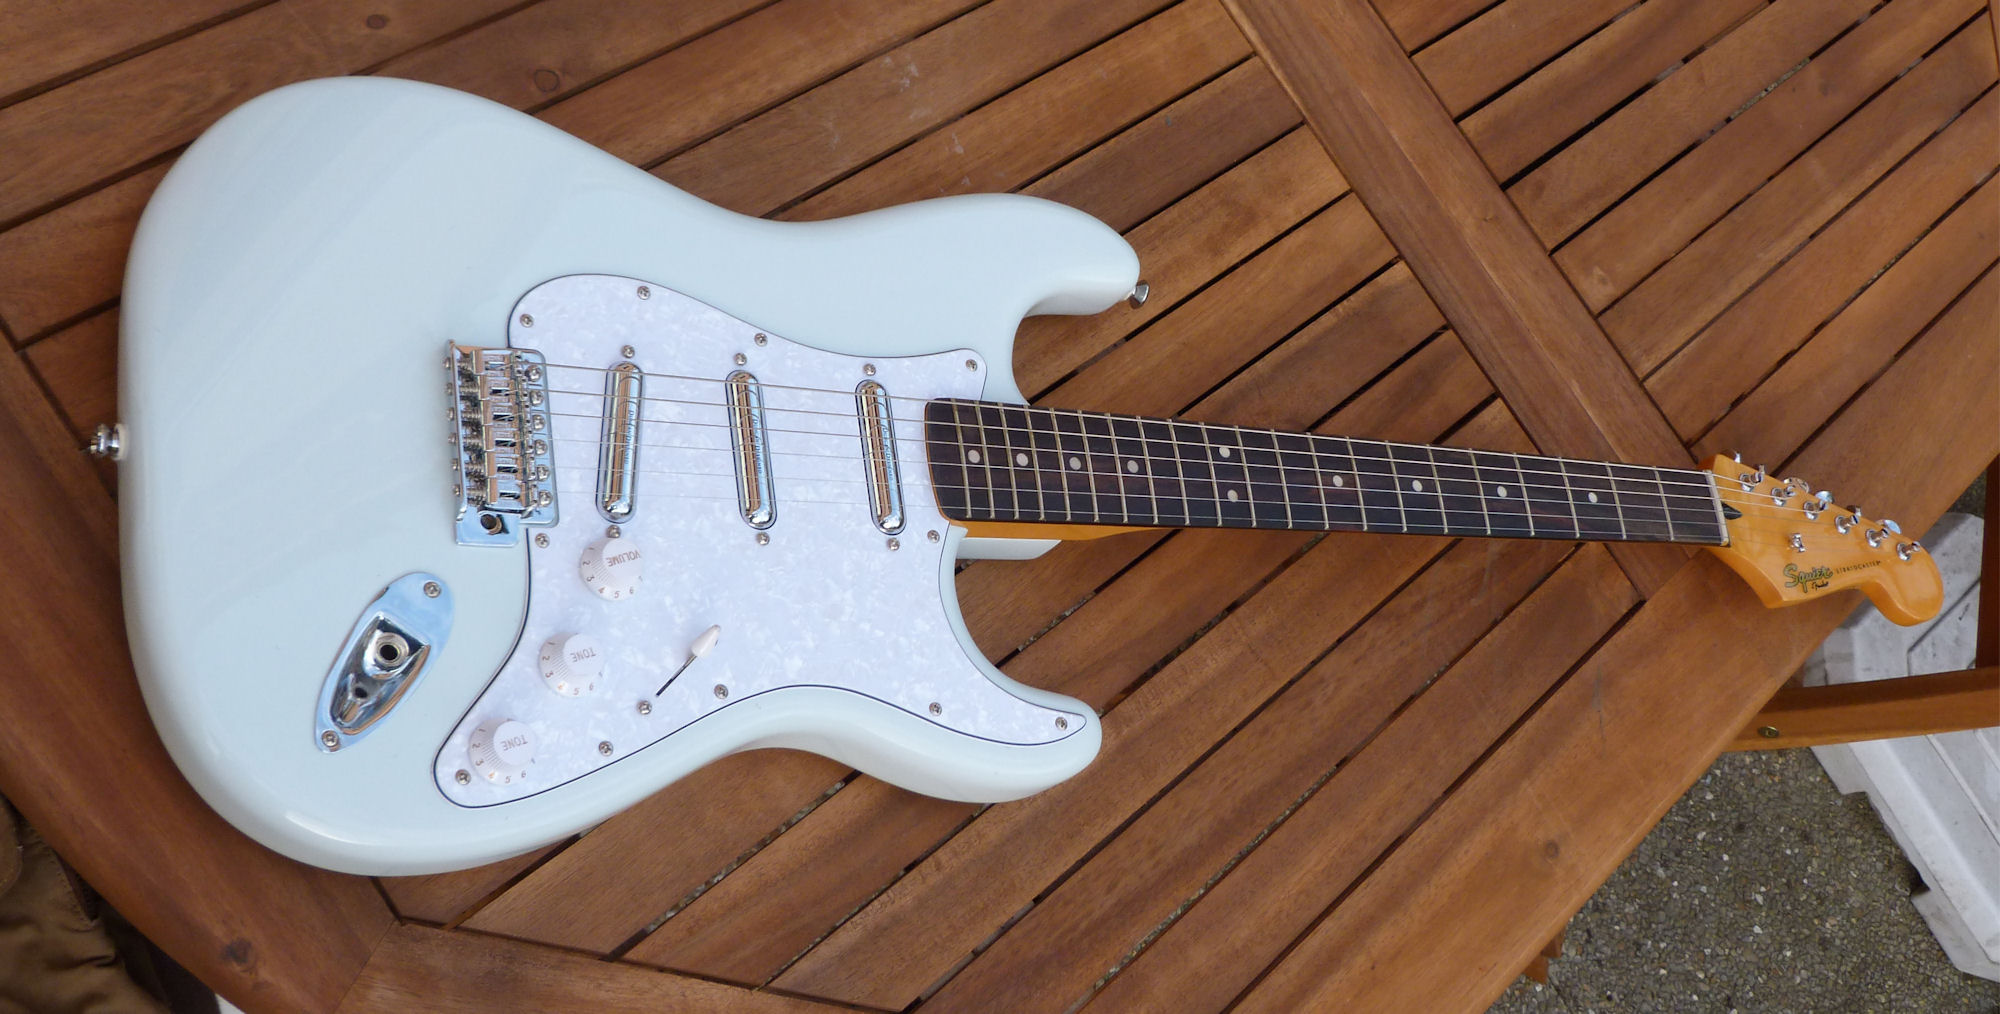 Squier Vintage Modified Stratocaster - electric guitar